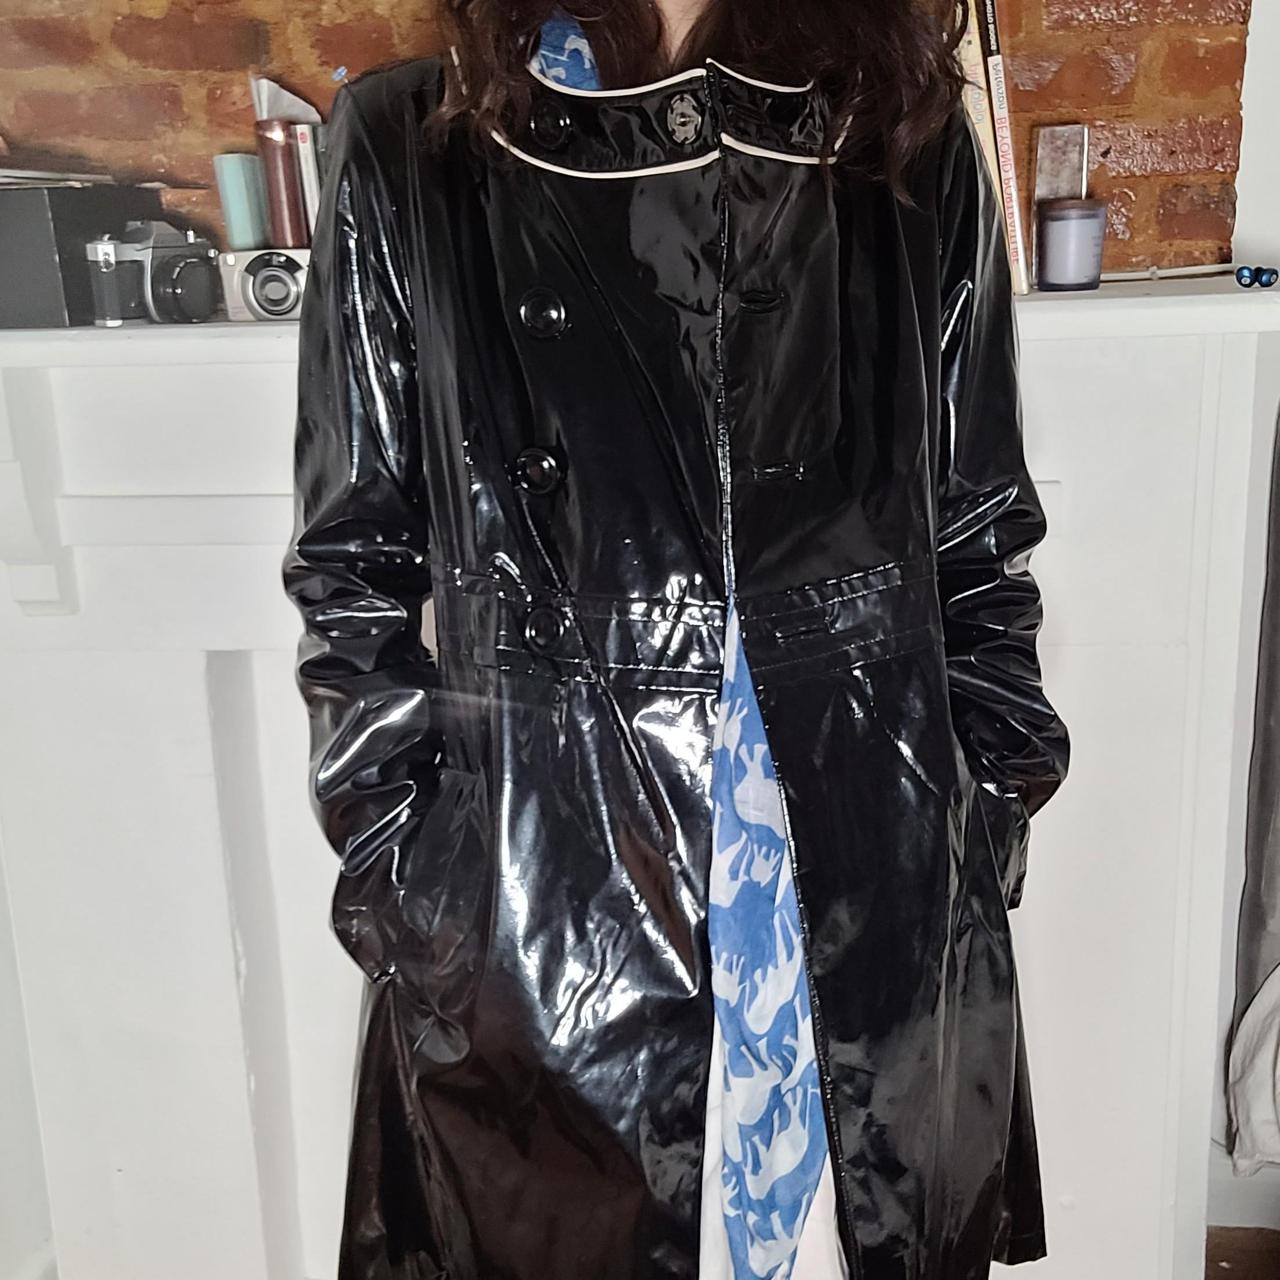 Be that mysterious girl in this raincoat - Depop